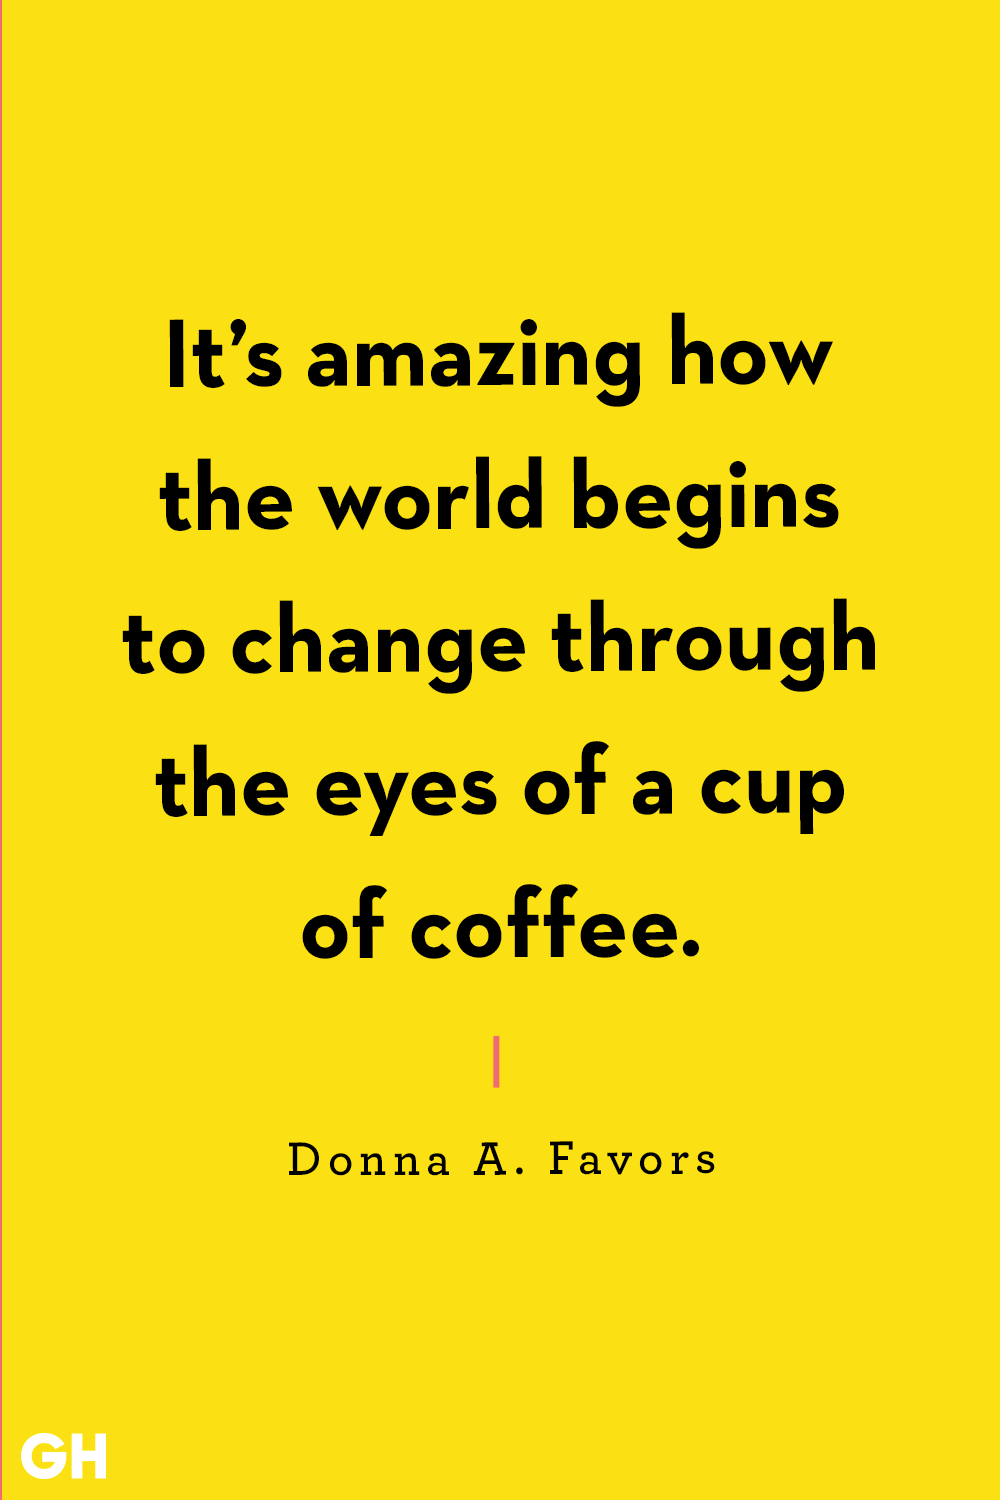 40 Funny Coffee Quotes Best Coffee Quotes And Sayings